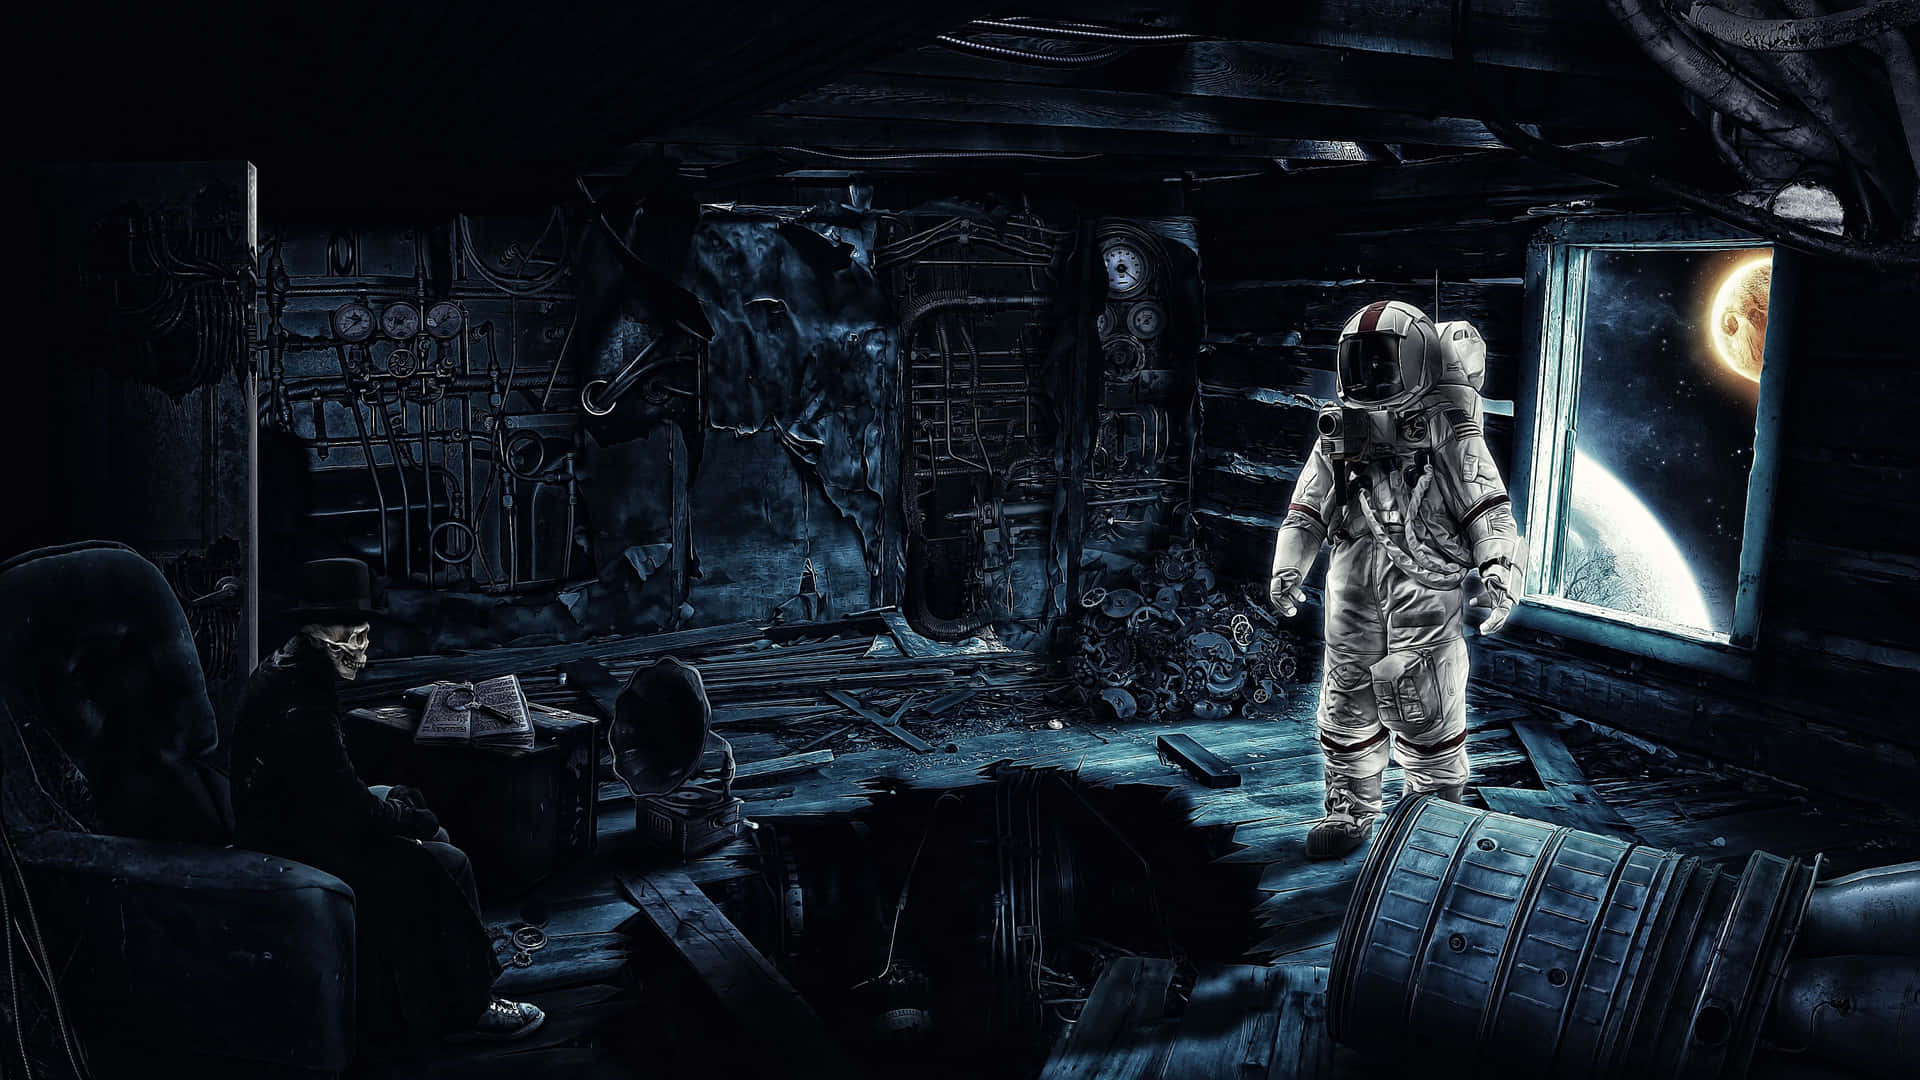 A thrilling space exploration featuring an imaginative astronaut Wallpaper